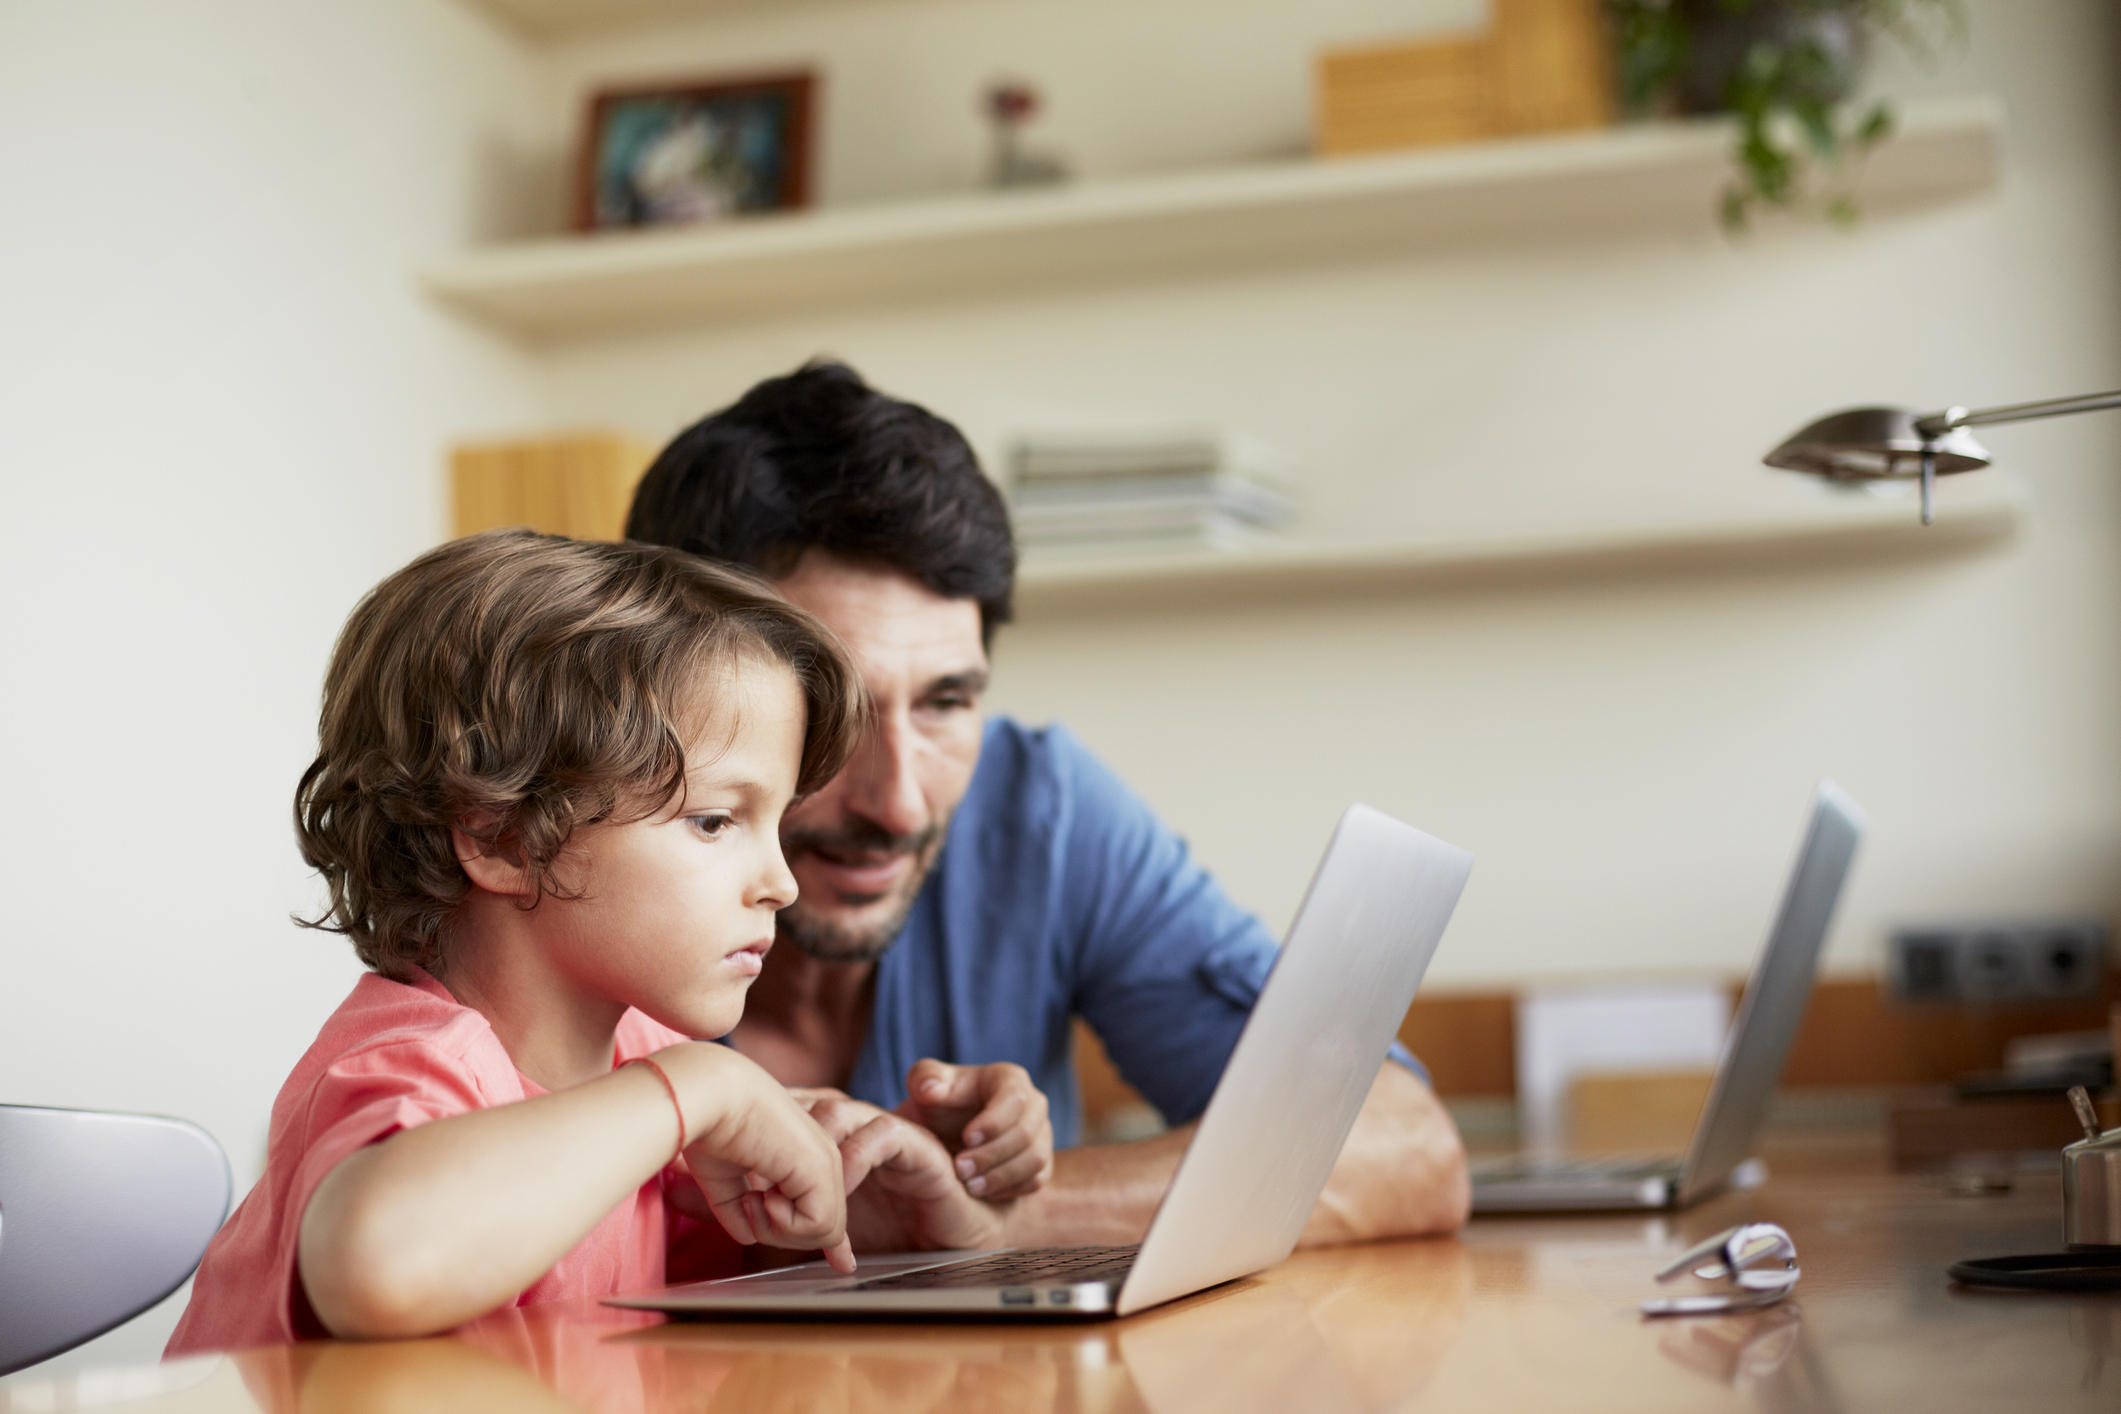 Parents guide to keeping their kids safe online